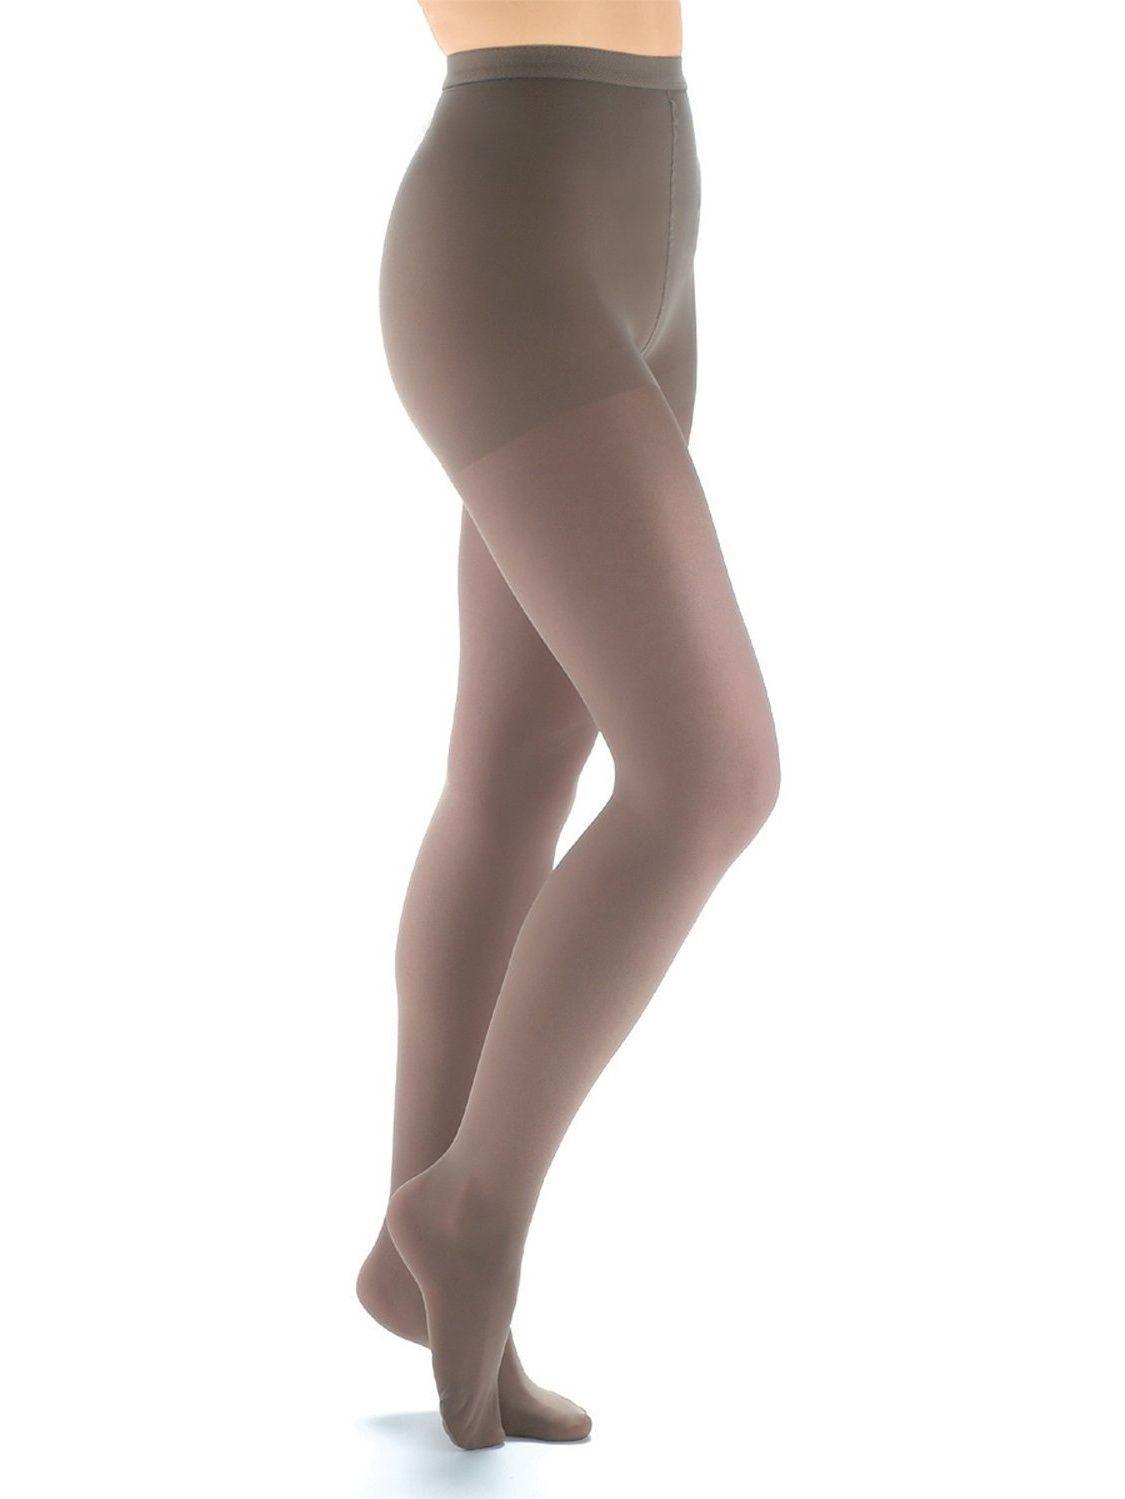 best of Tights Exercise pantyhose